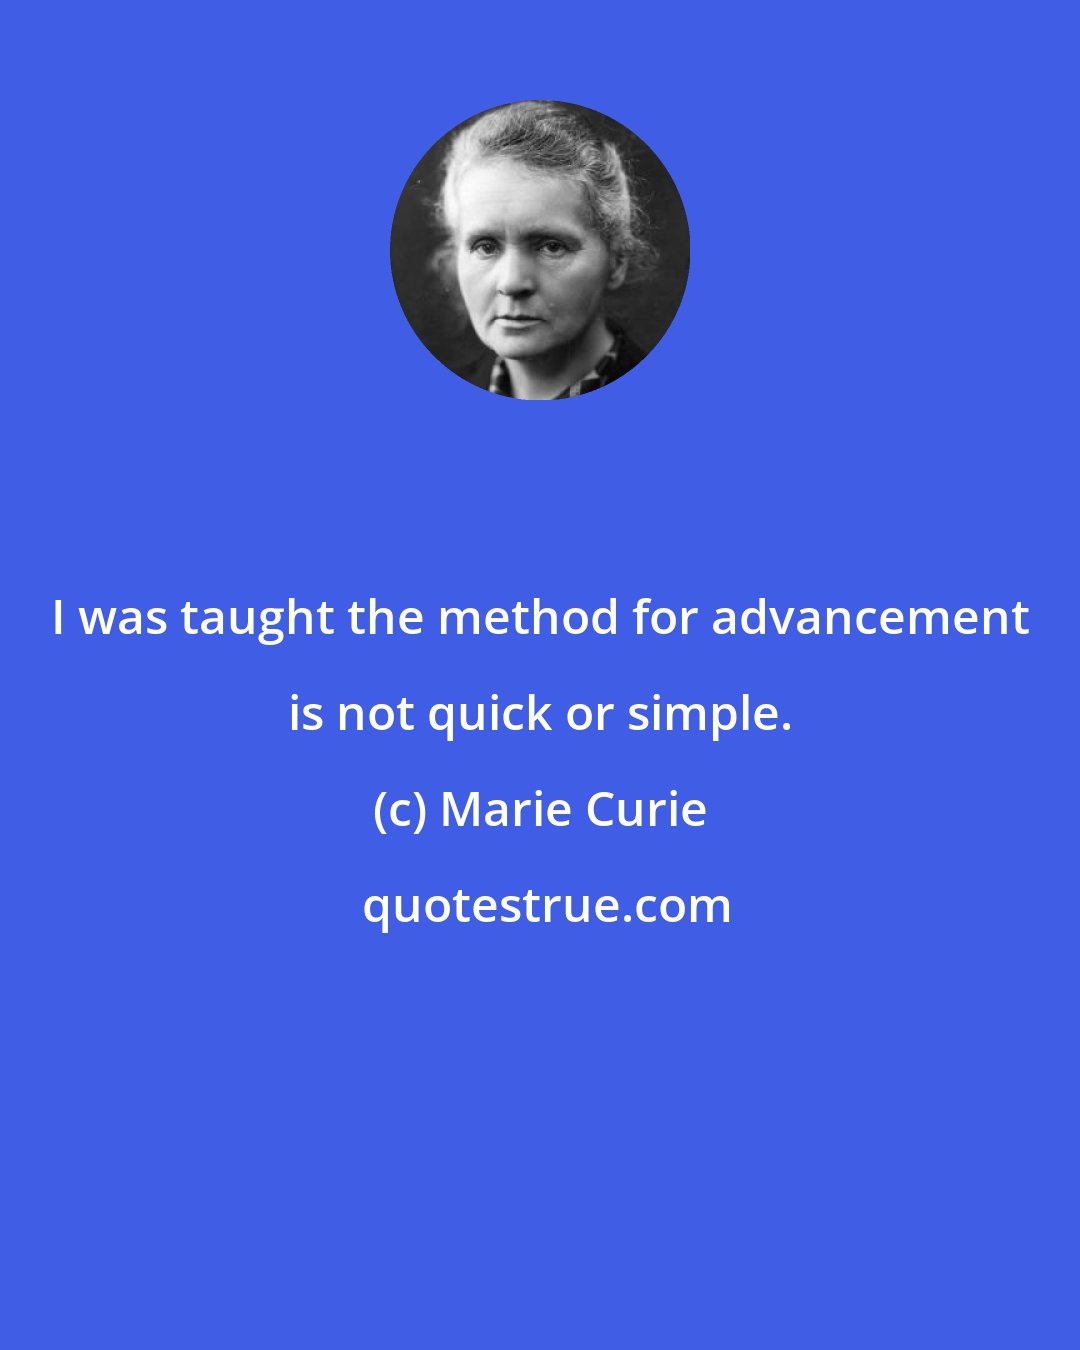 Marie Curie: I was taught the method for advancement is not quick or simple.